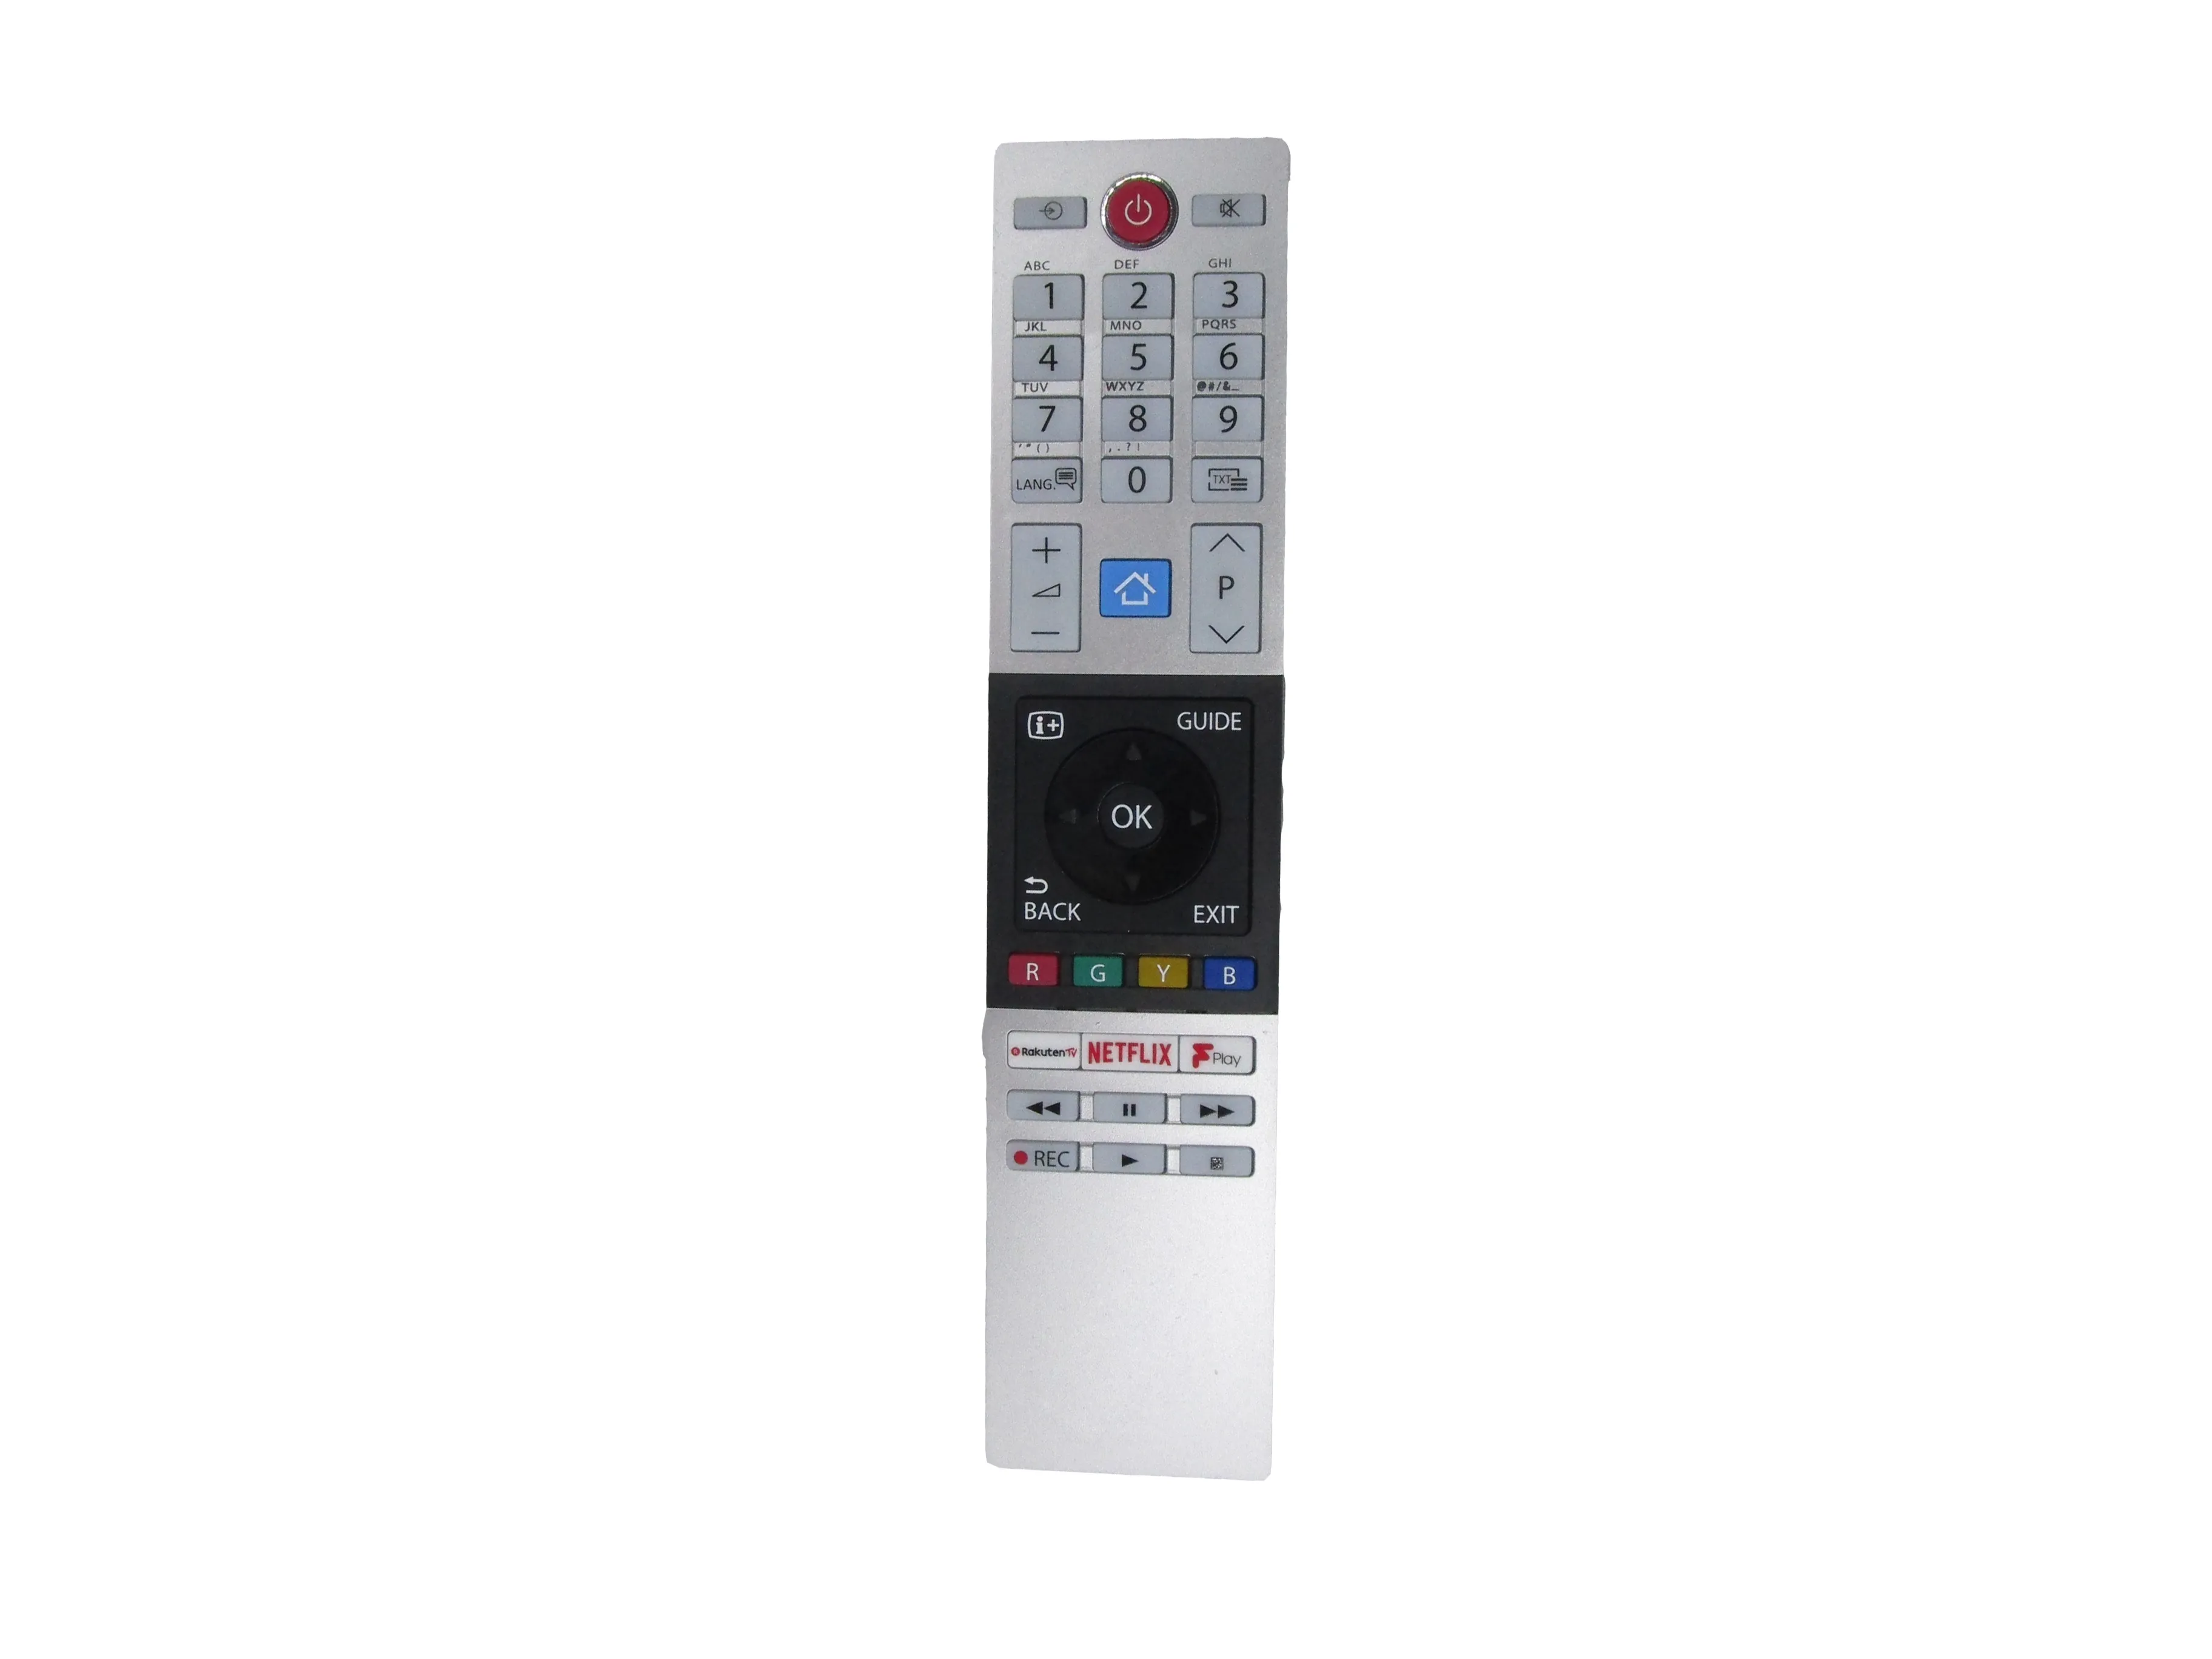 Remote Control Led Hdtv Tv For Toshiba Ct-8533 Rc42150 24D2863Db 24L2863Db 24W2863Db 24D3863Db 24W3863Db 28W3863Db 28W2863Db 32D2863Db 32L2863Db 39L2863Dblcd